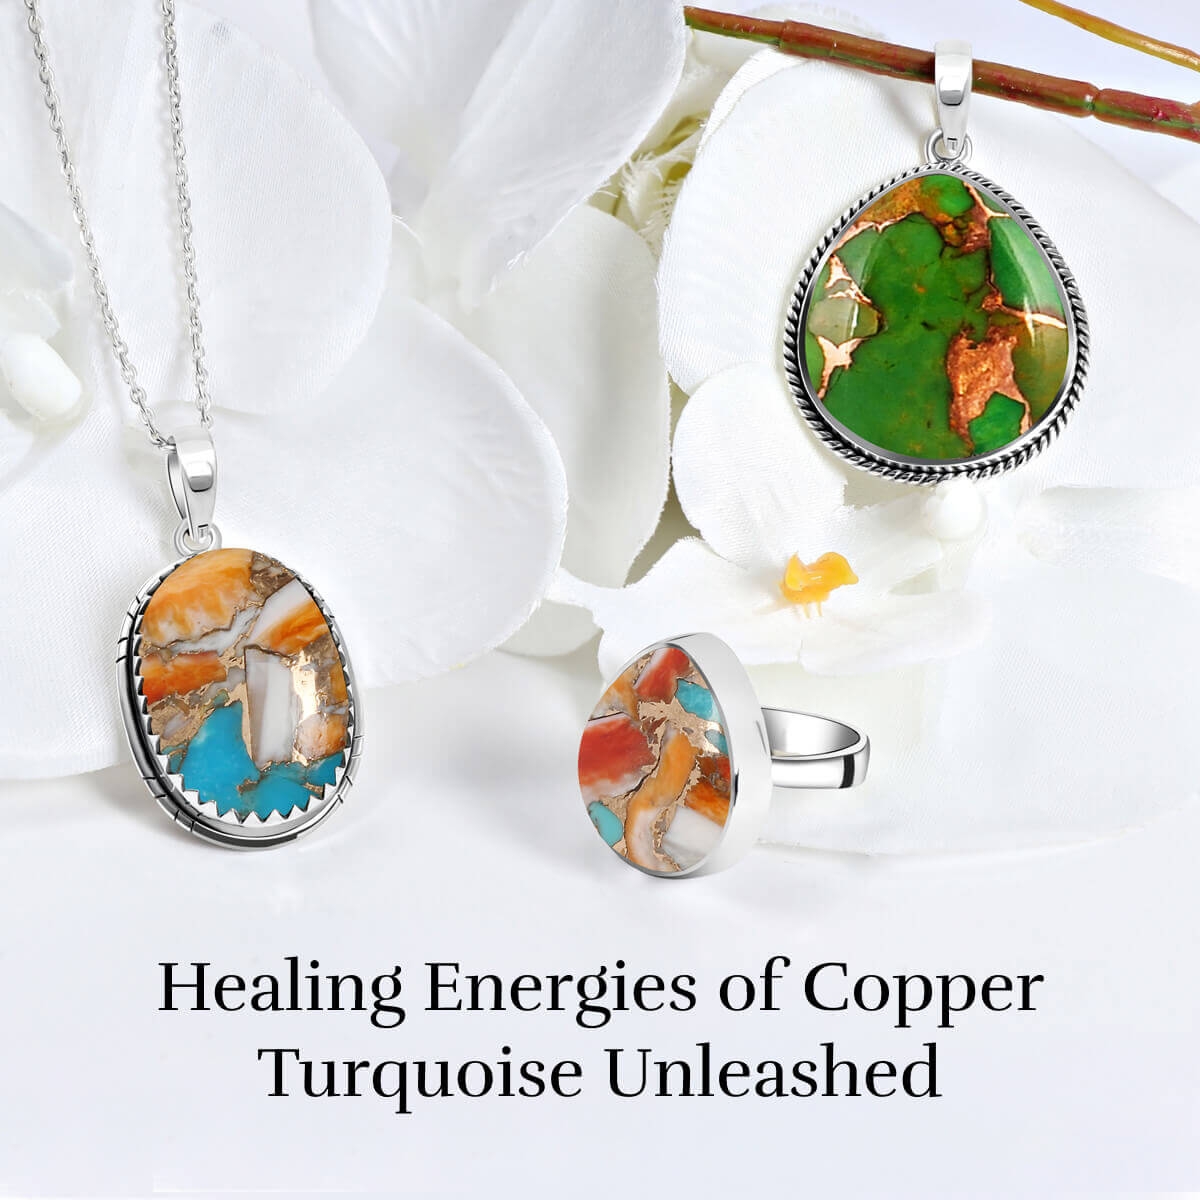 Copper Turquoise: Physical Healing properties